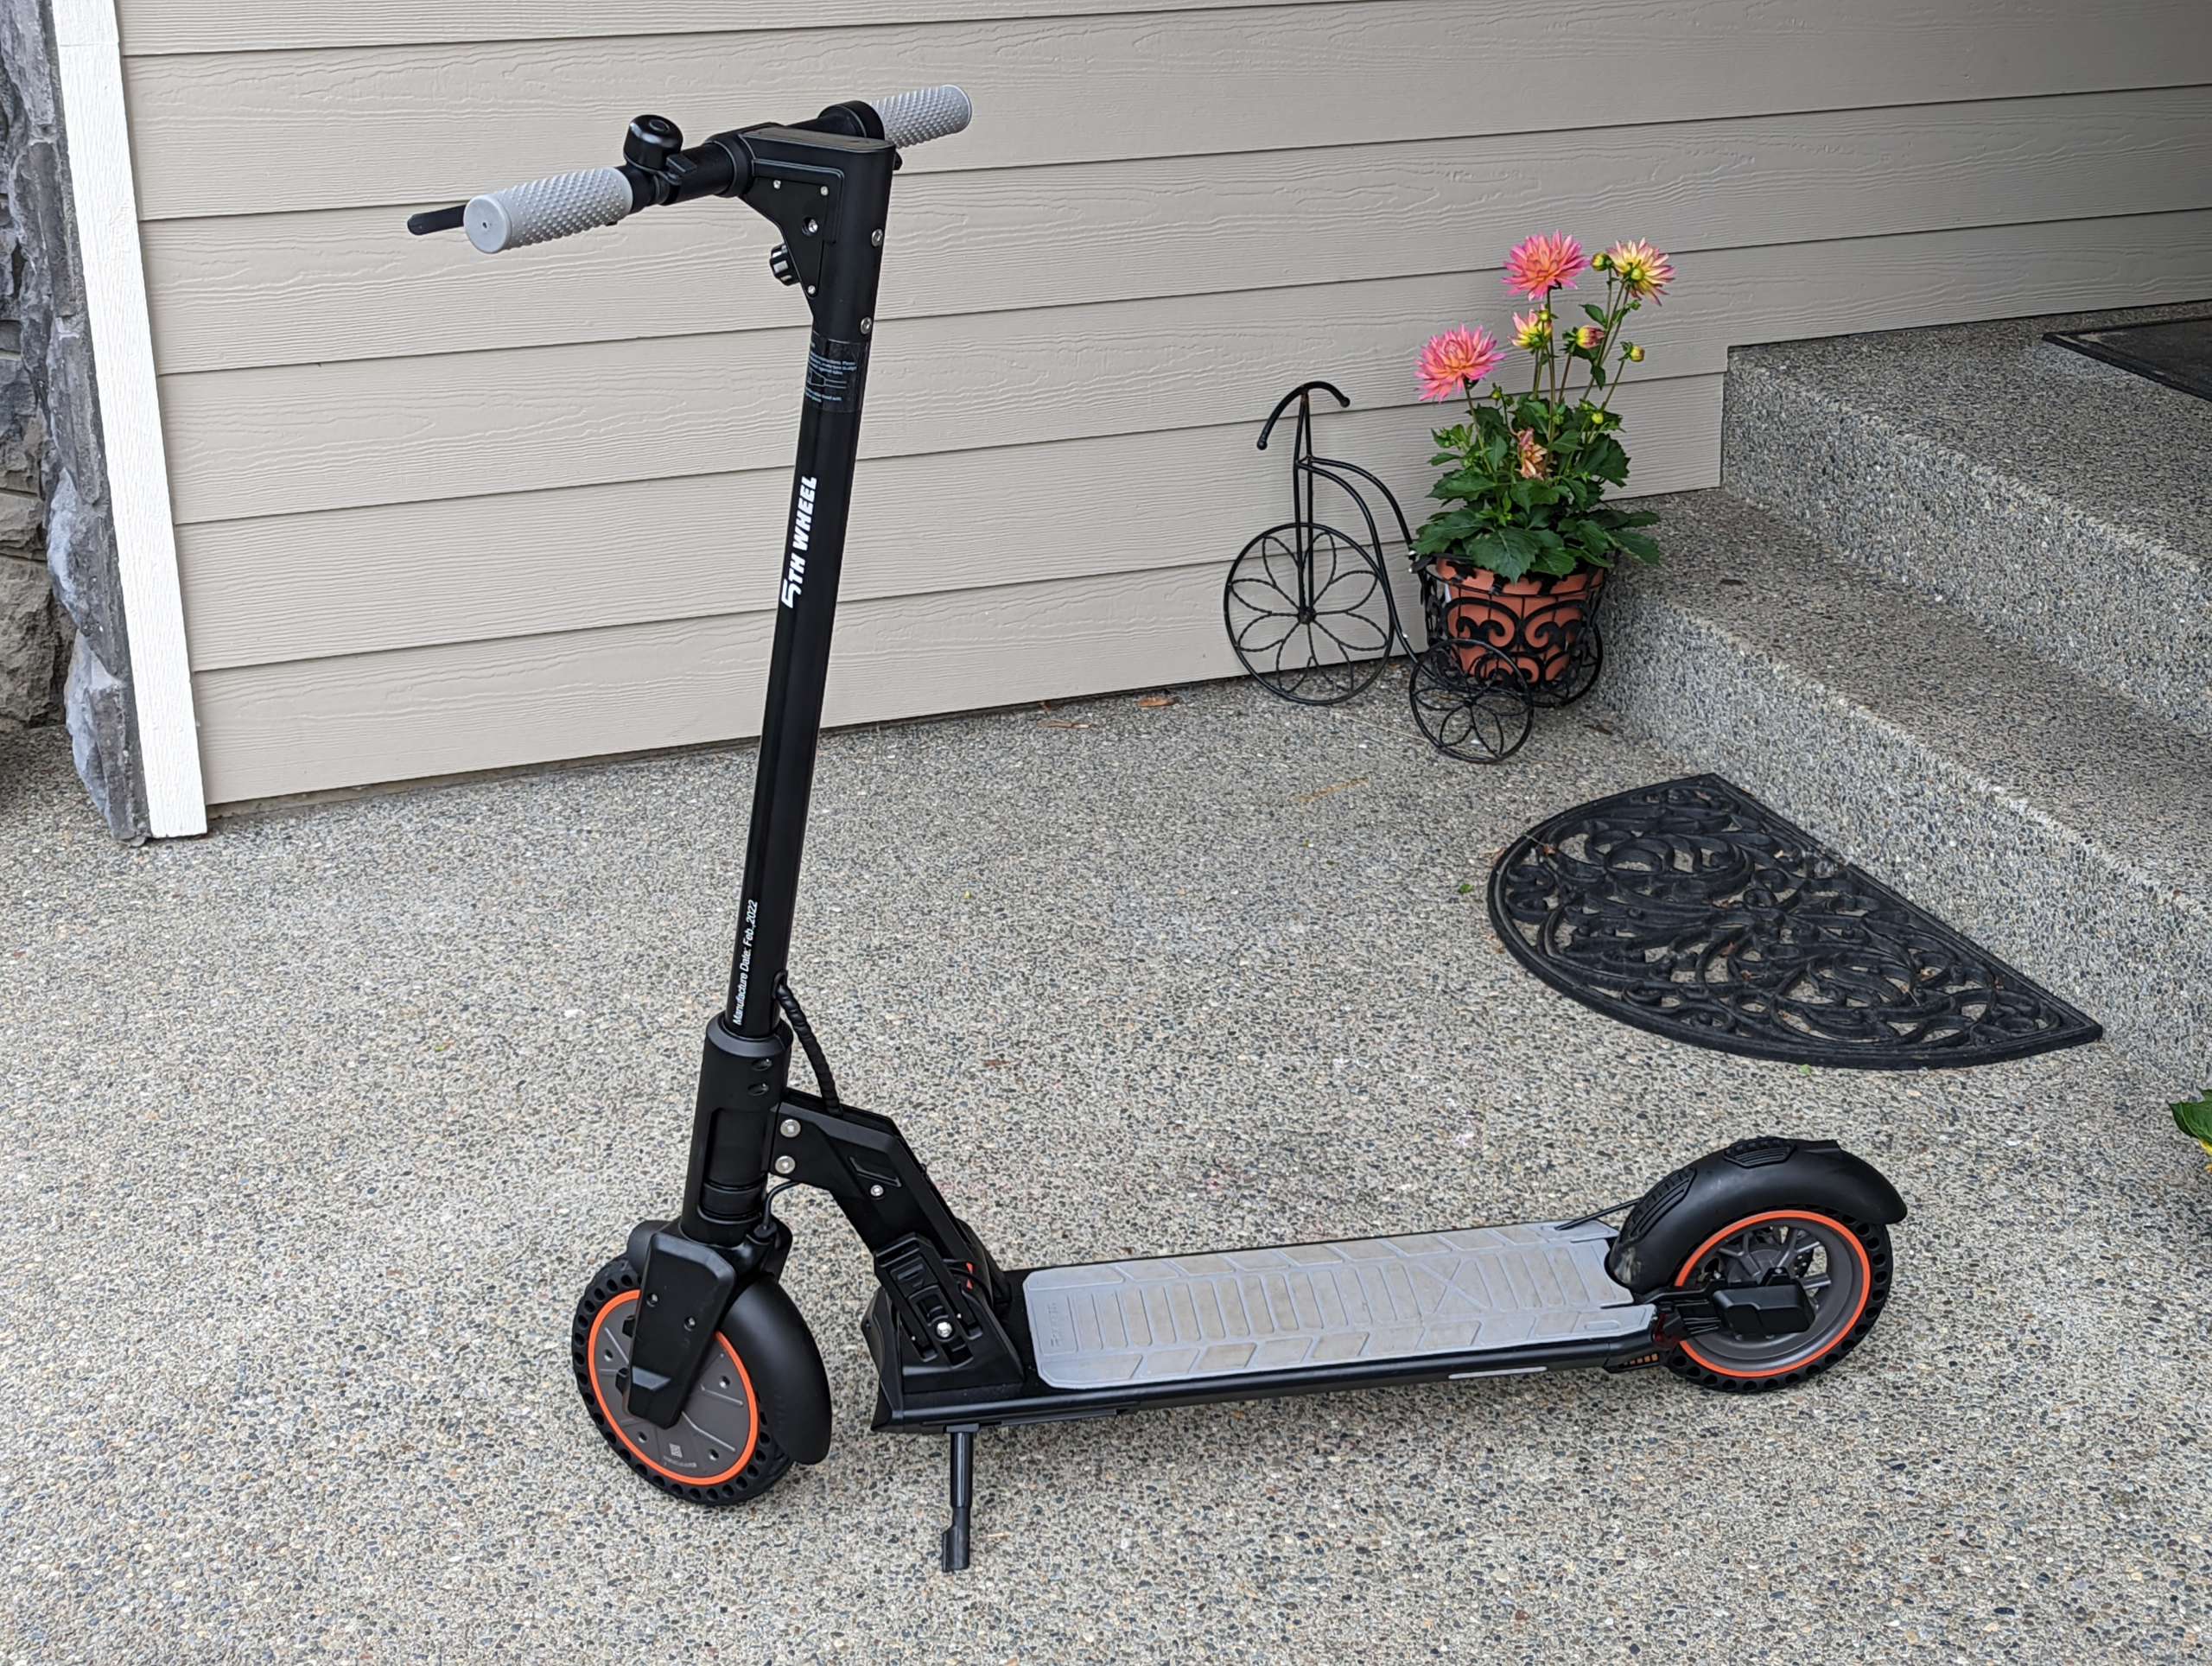 5th Wheel M2 electric scooter review - it's one rad ride - The Gadgeteer